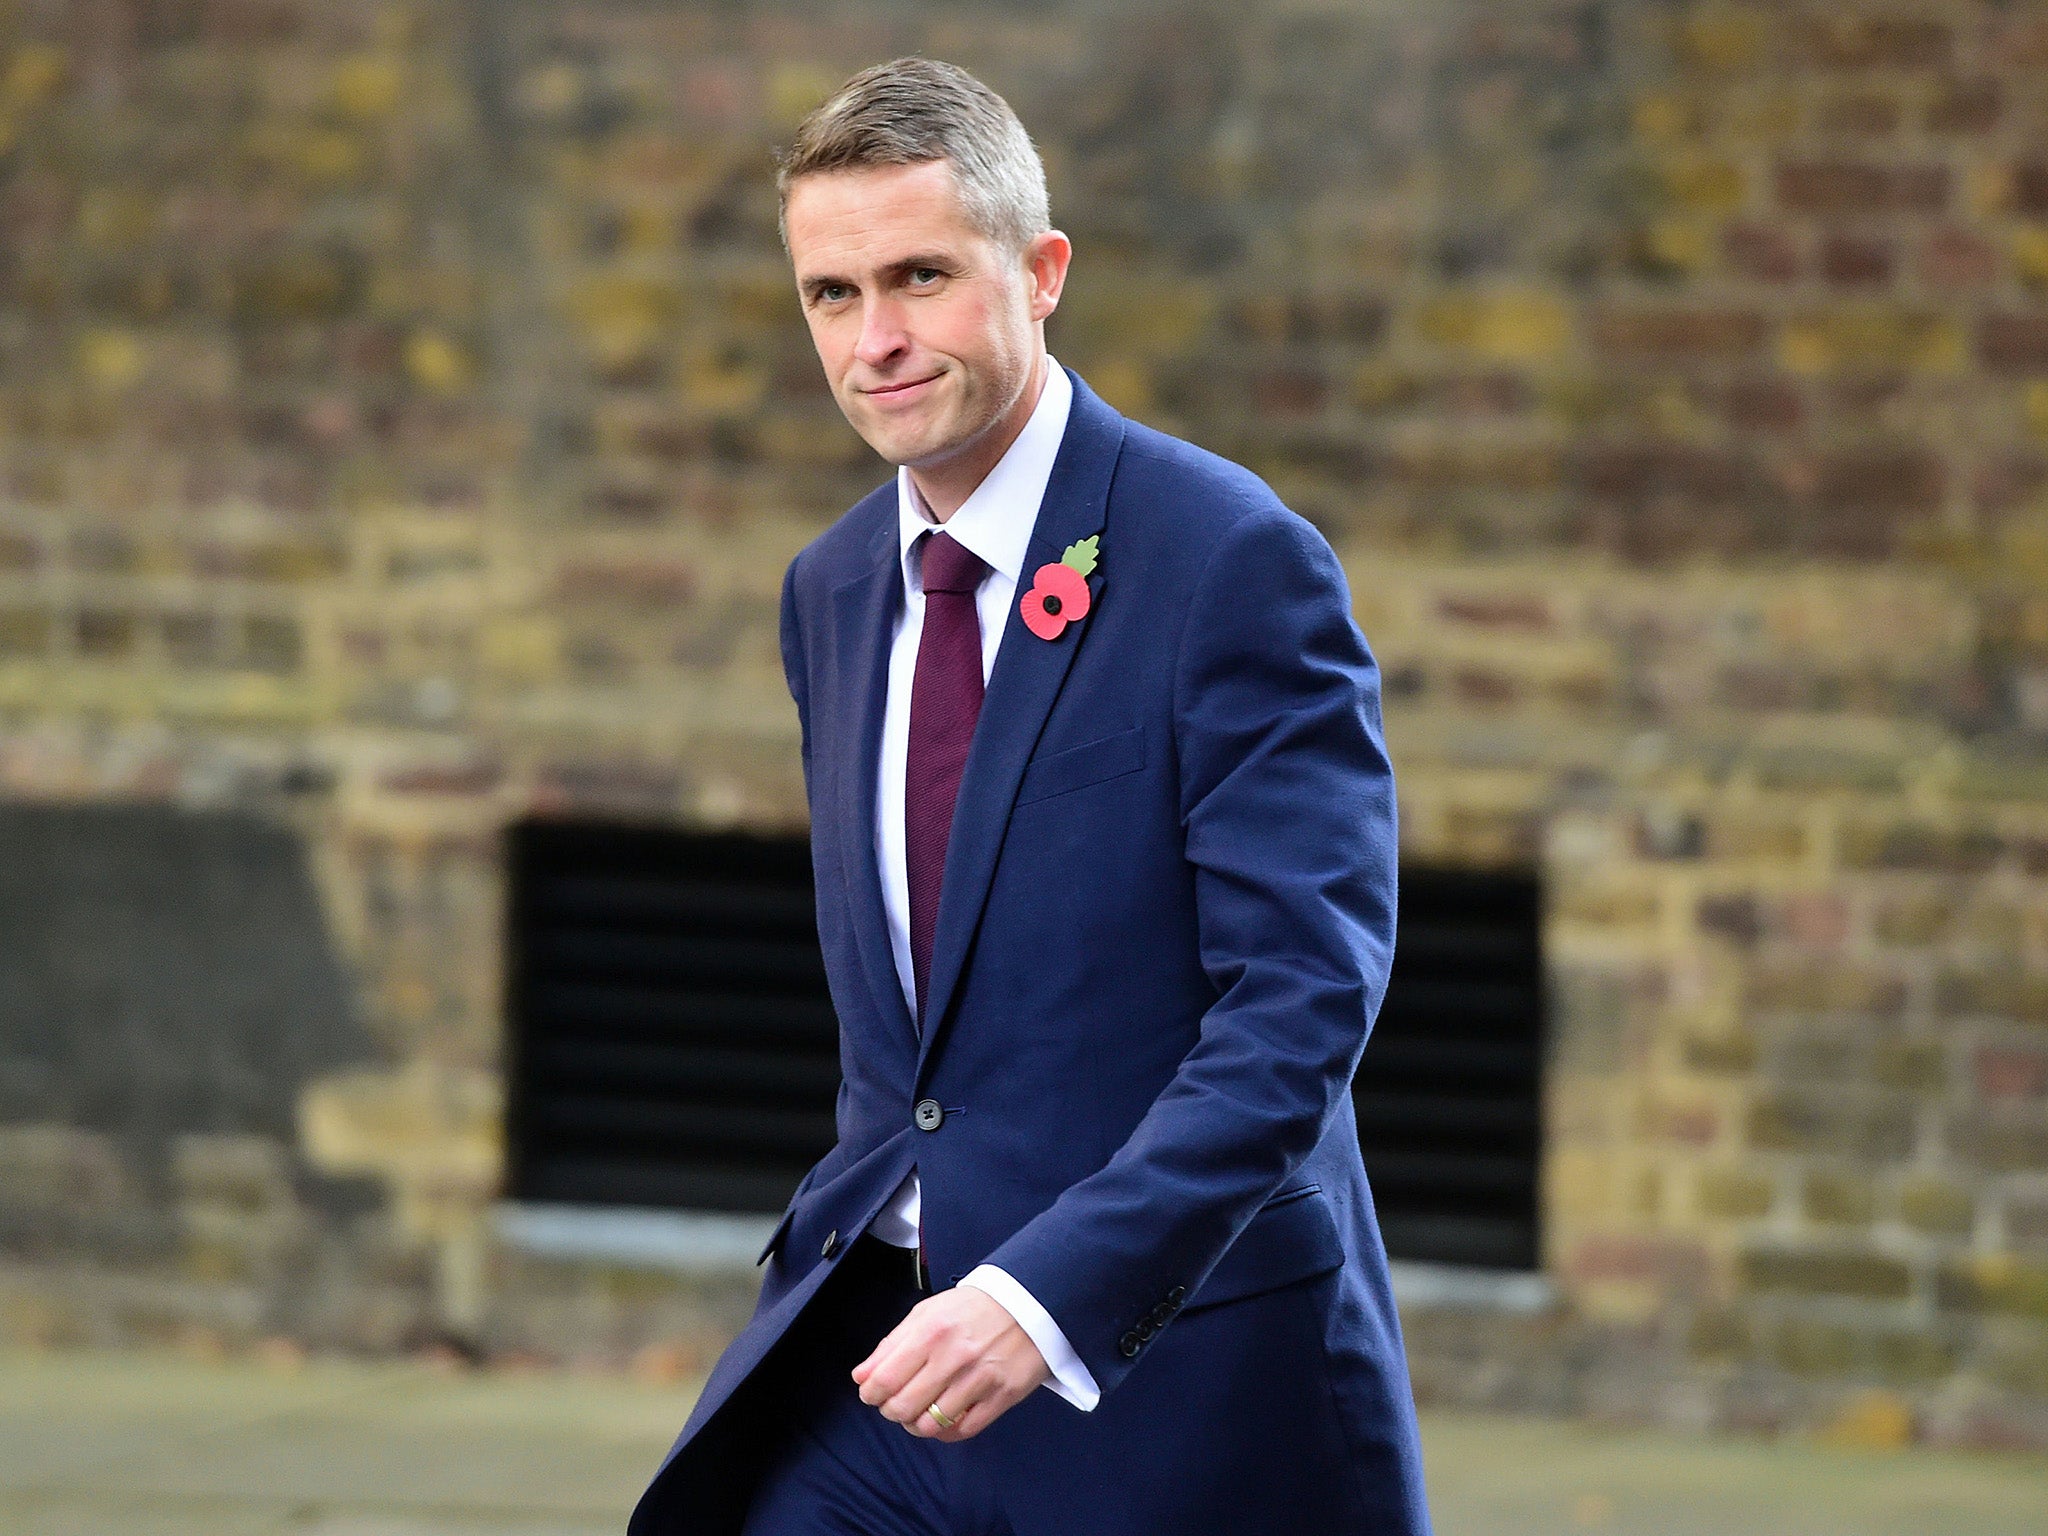 The appointment of the relatively underqualified Gavin Williamson was shocking for some